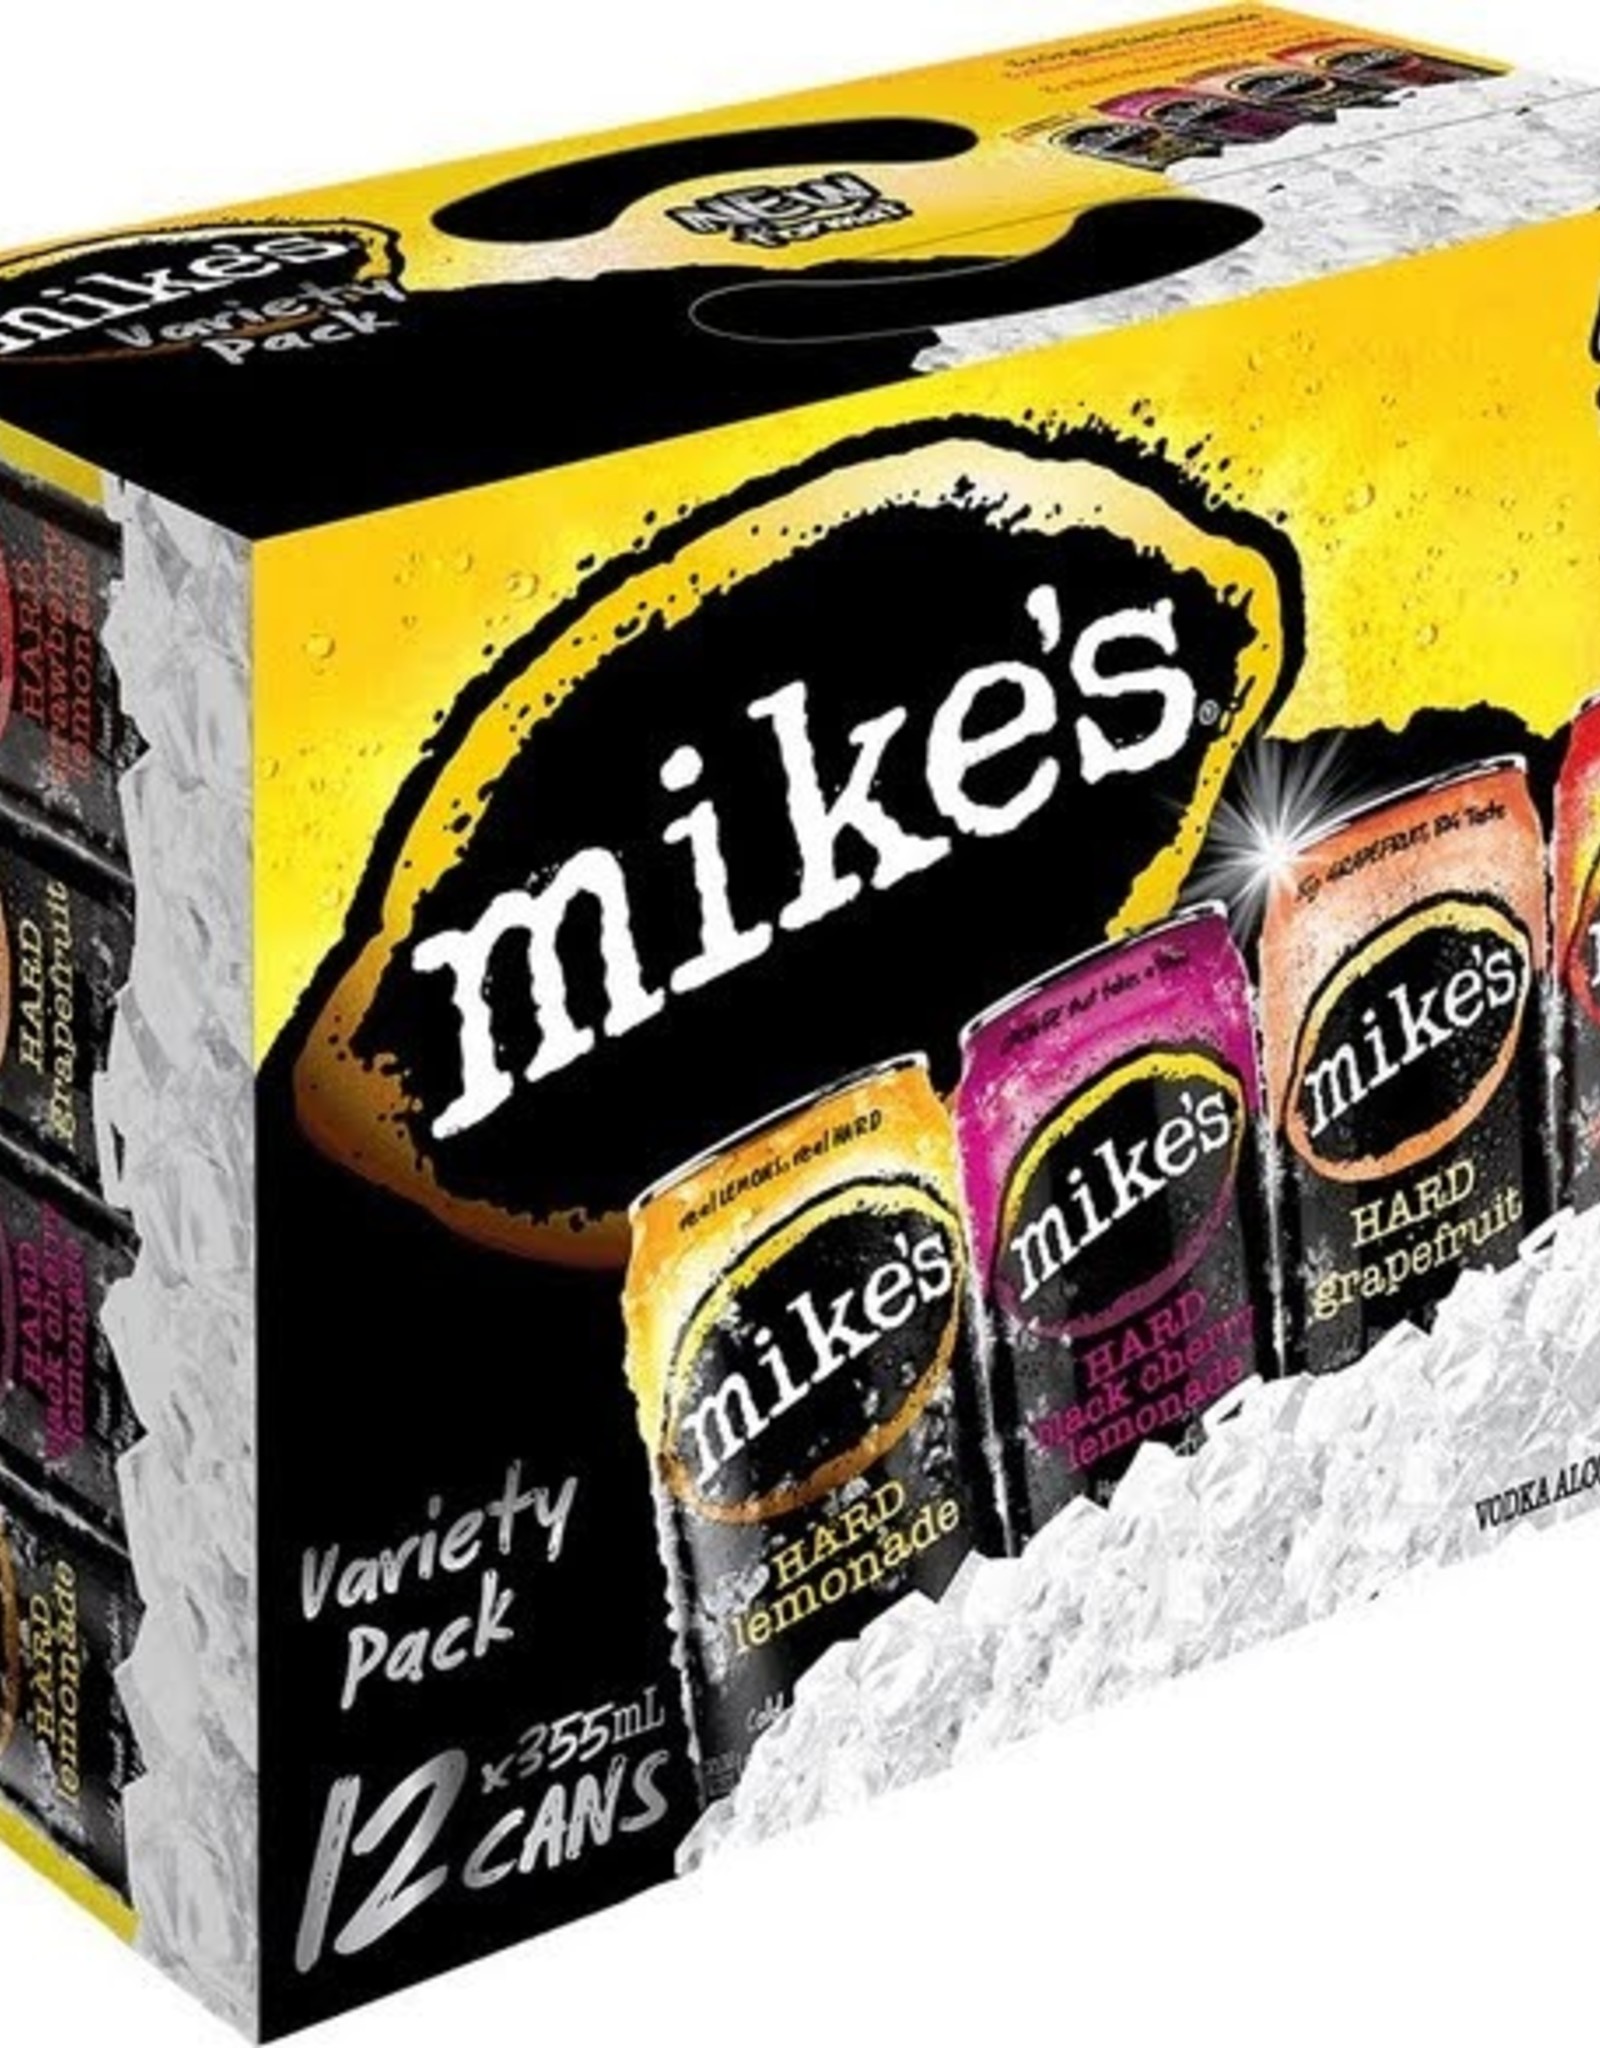 Mike's Variety Pack 12x12 oz cans